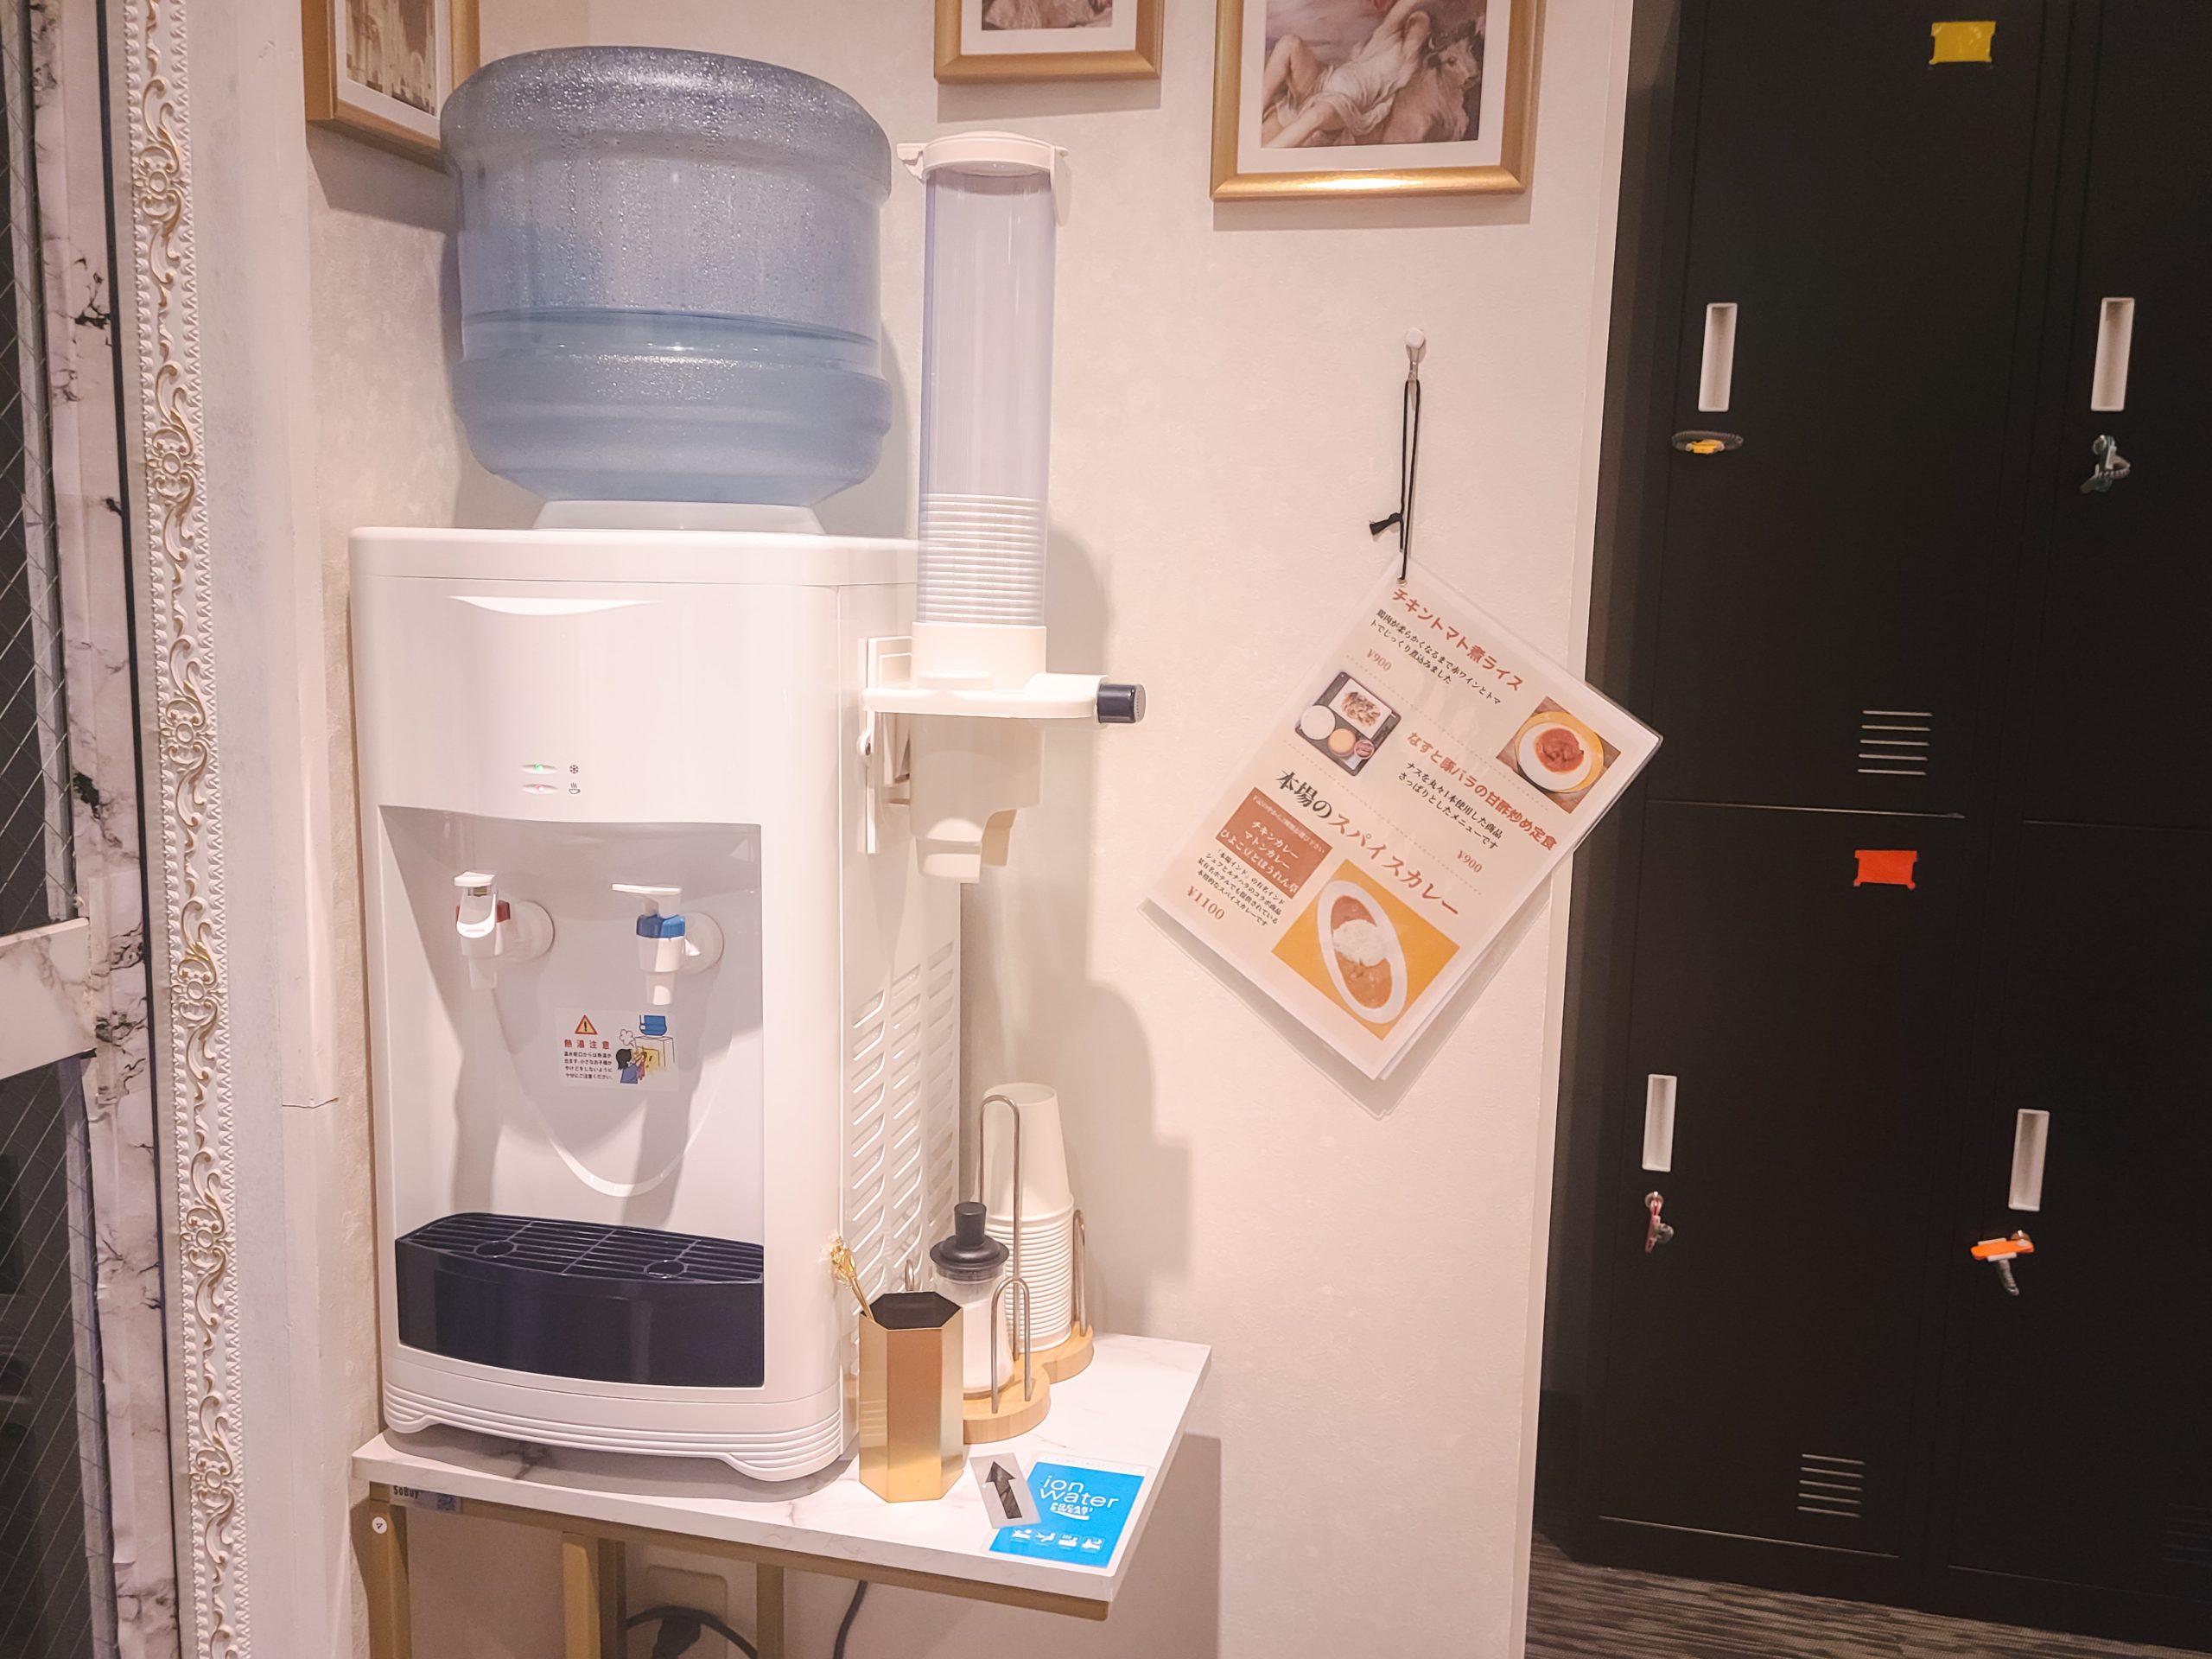 The water dispenser with ion powder to replenish electrolytes